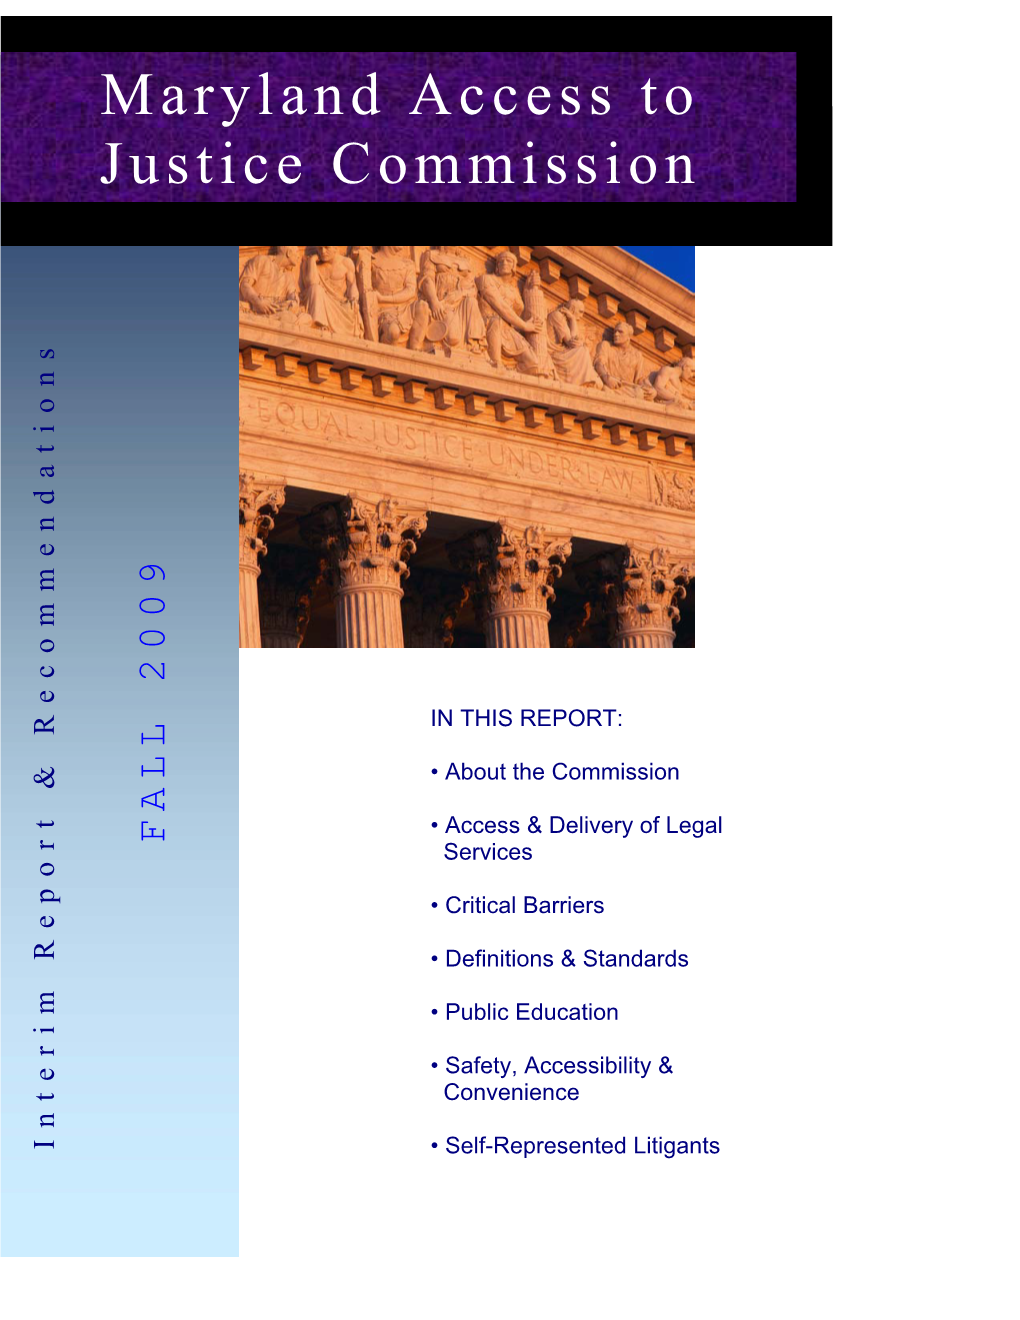 Maryland Access to Justice Commission – Membership